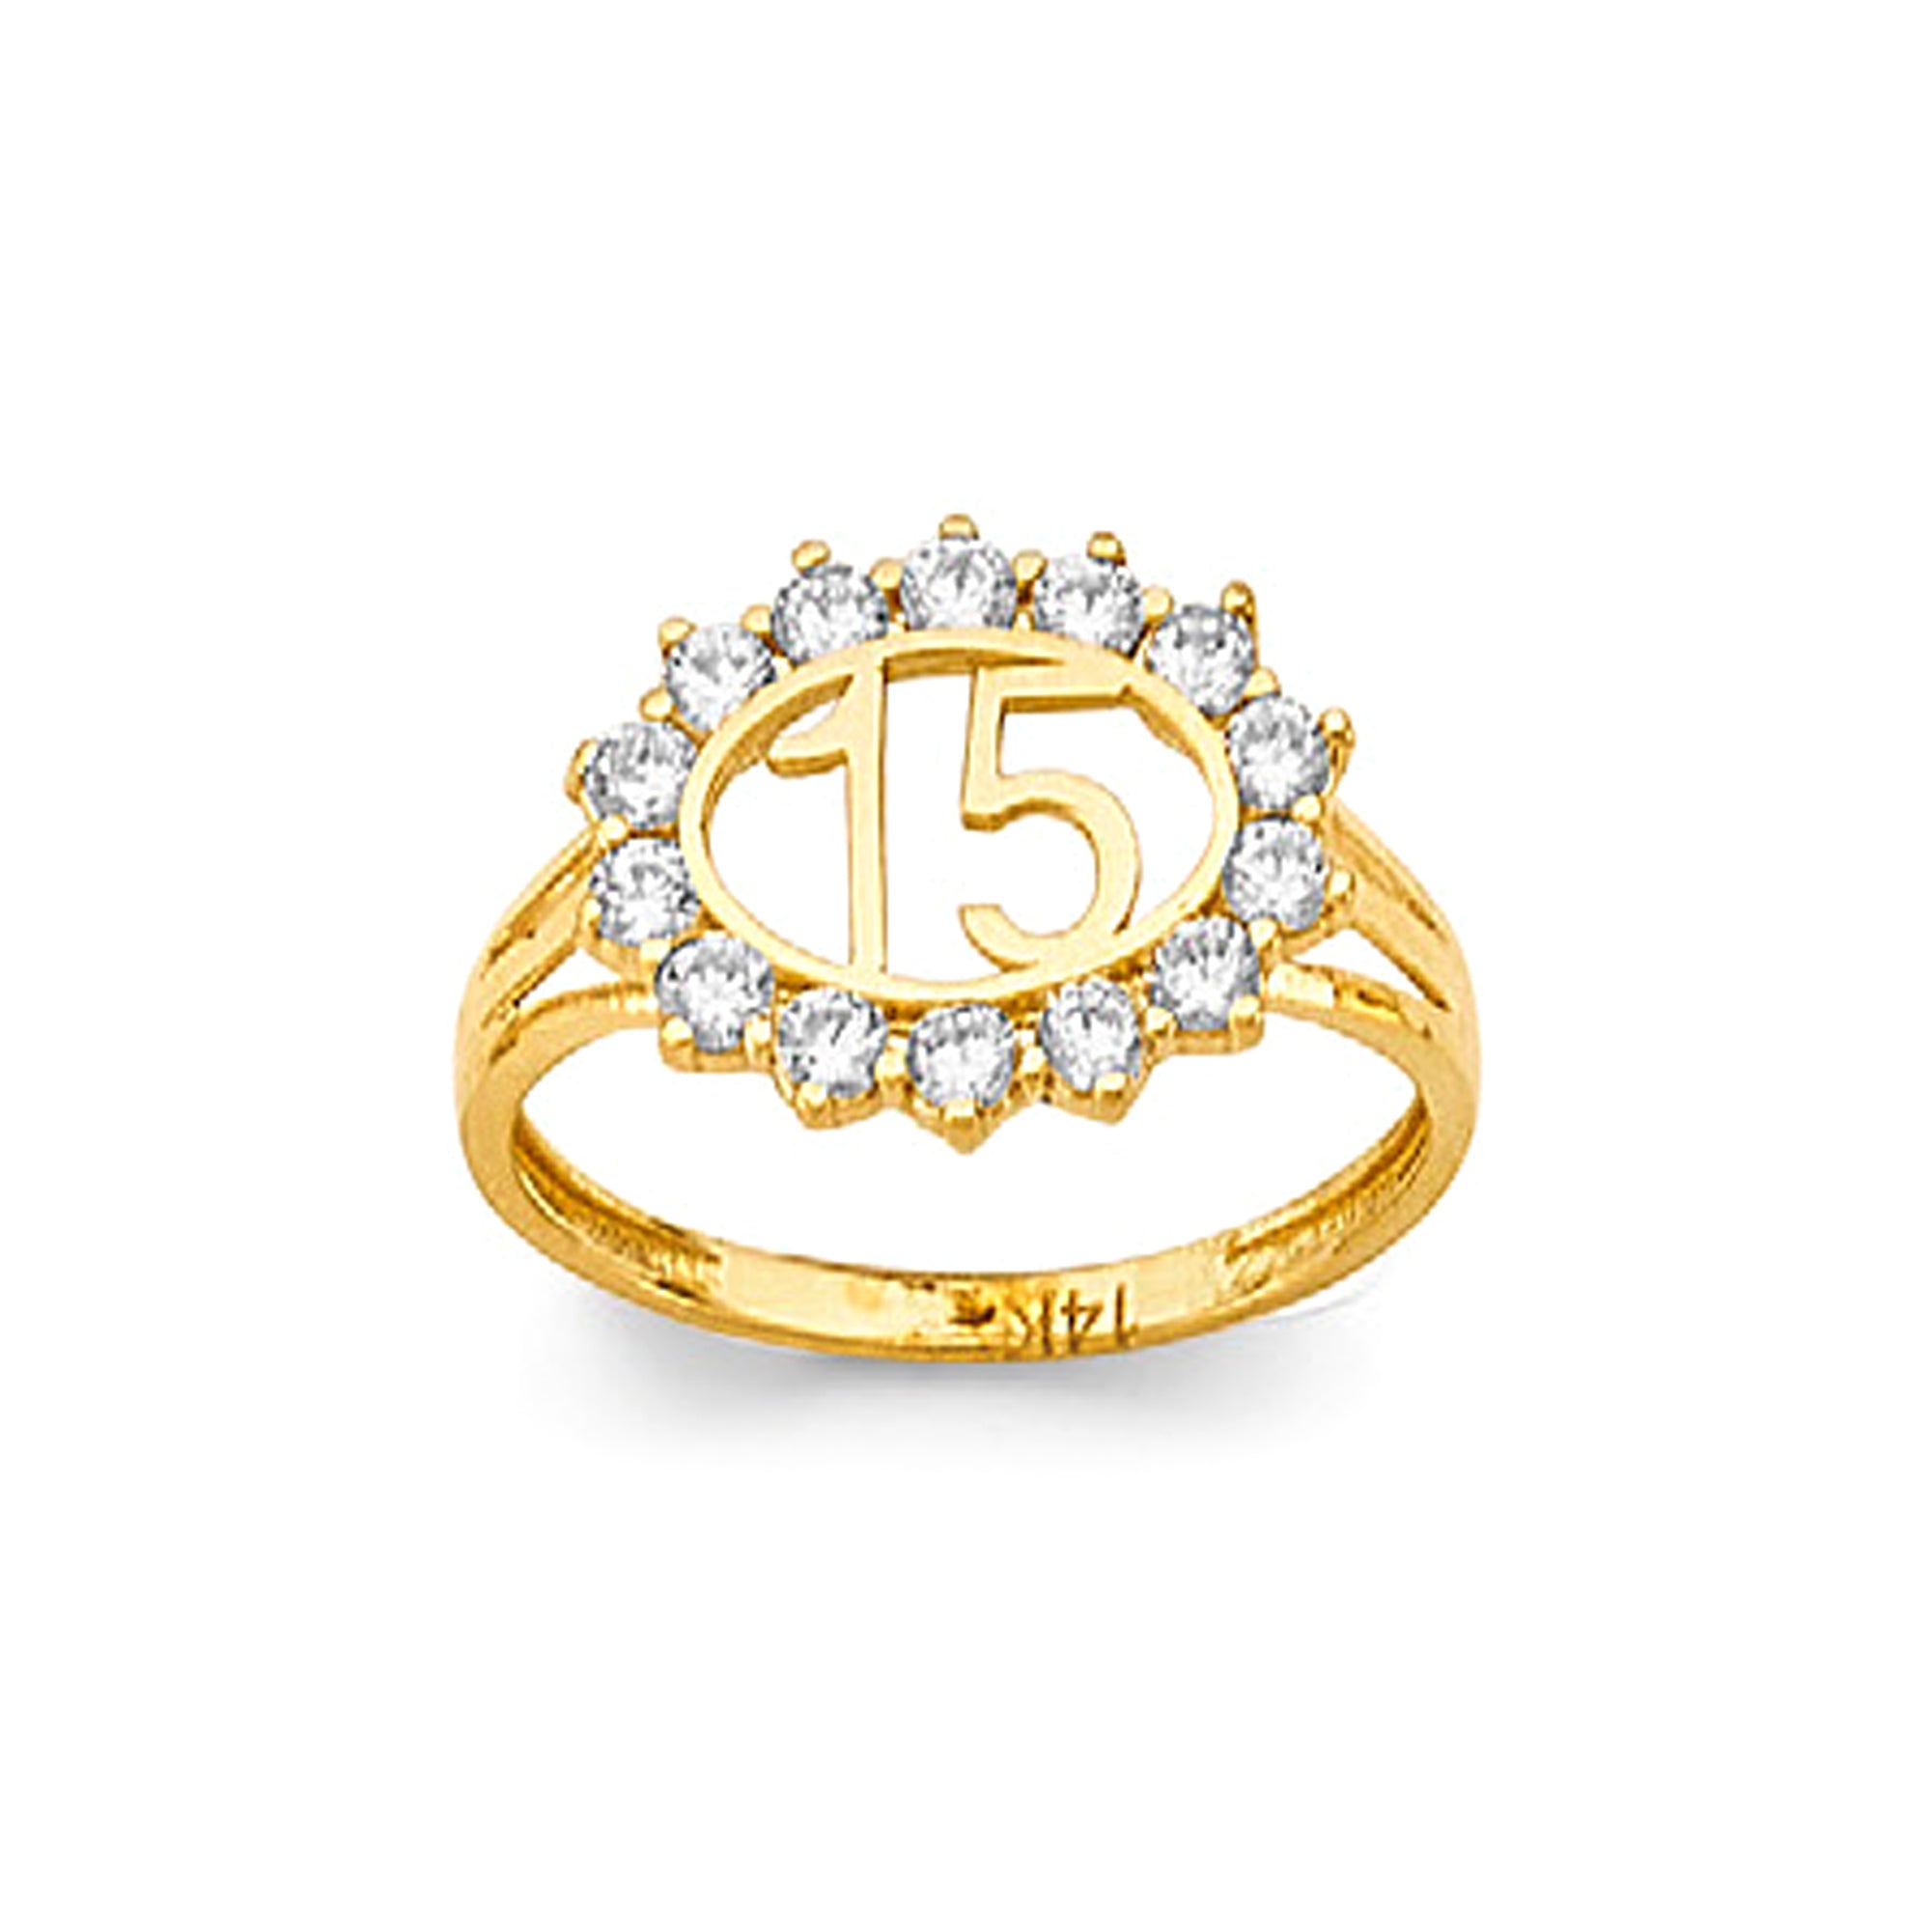 CZ East-west Oval 15 Anos Ring in Solid Gold 